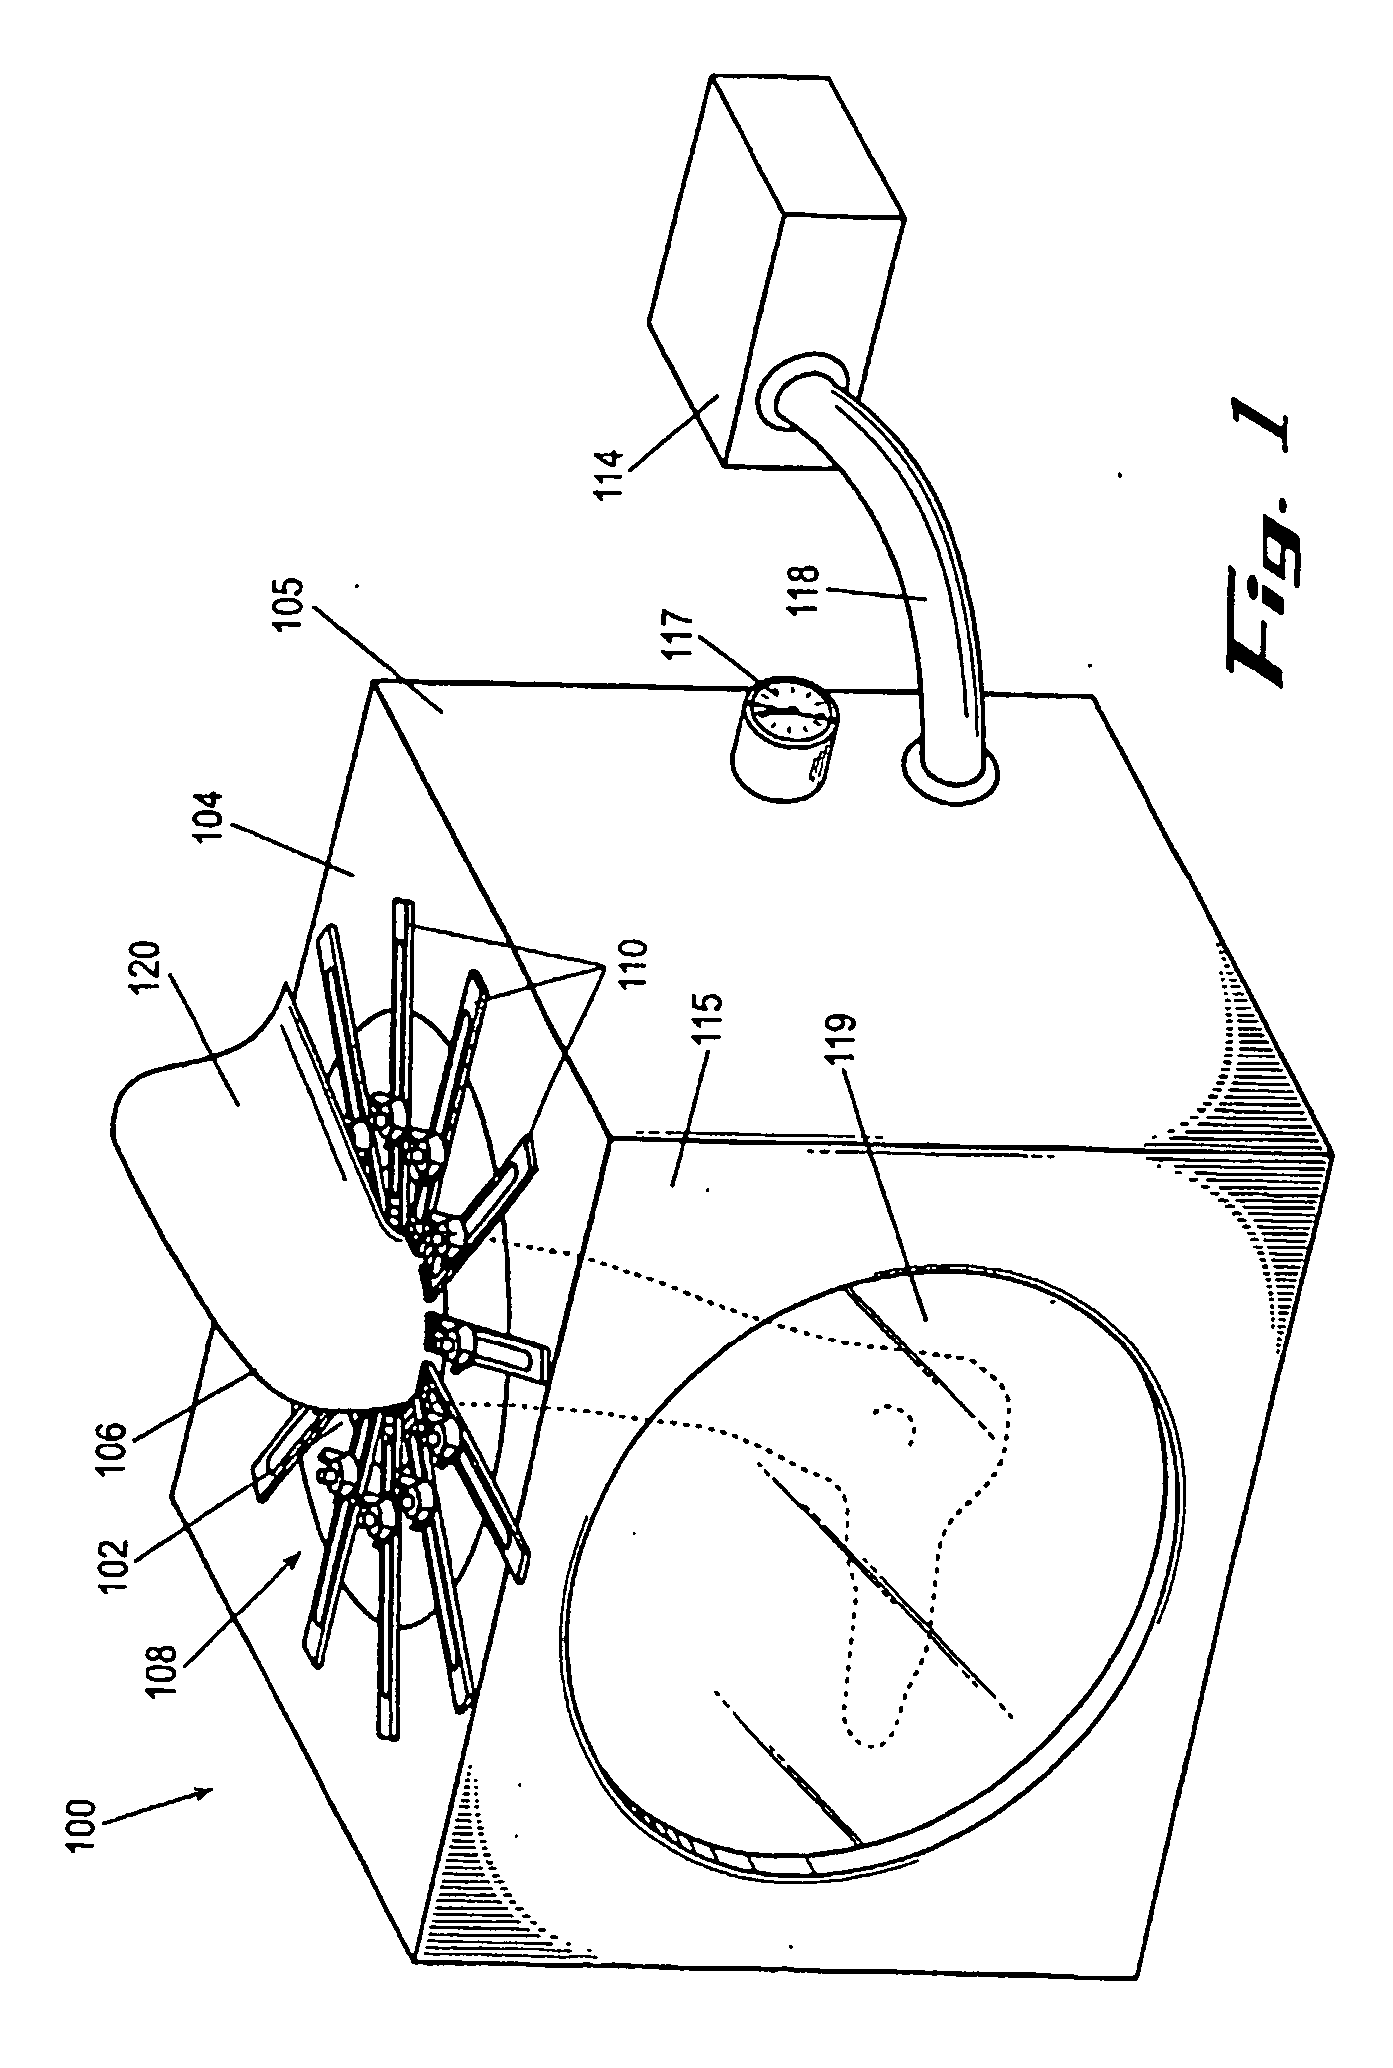 Method and device to enhance skin blood flow